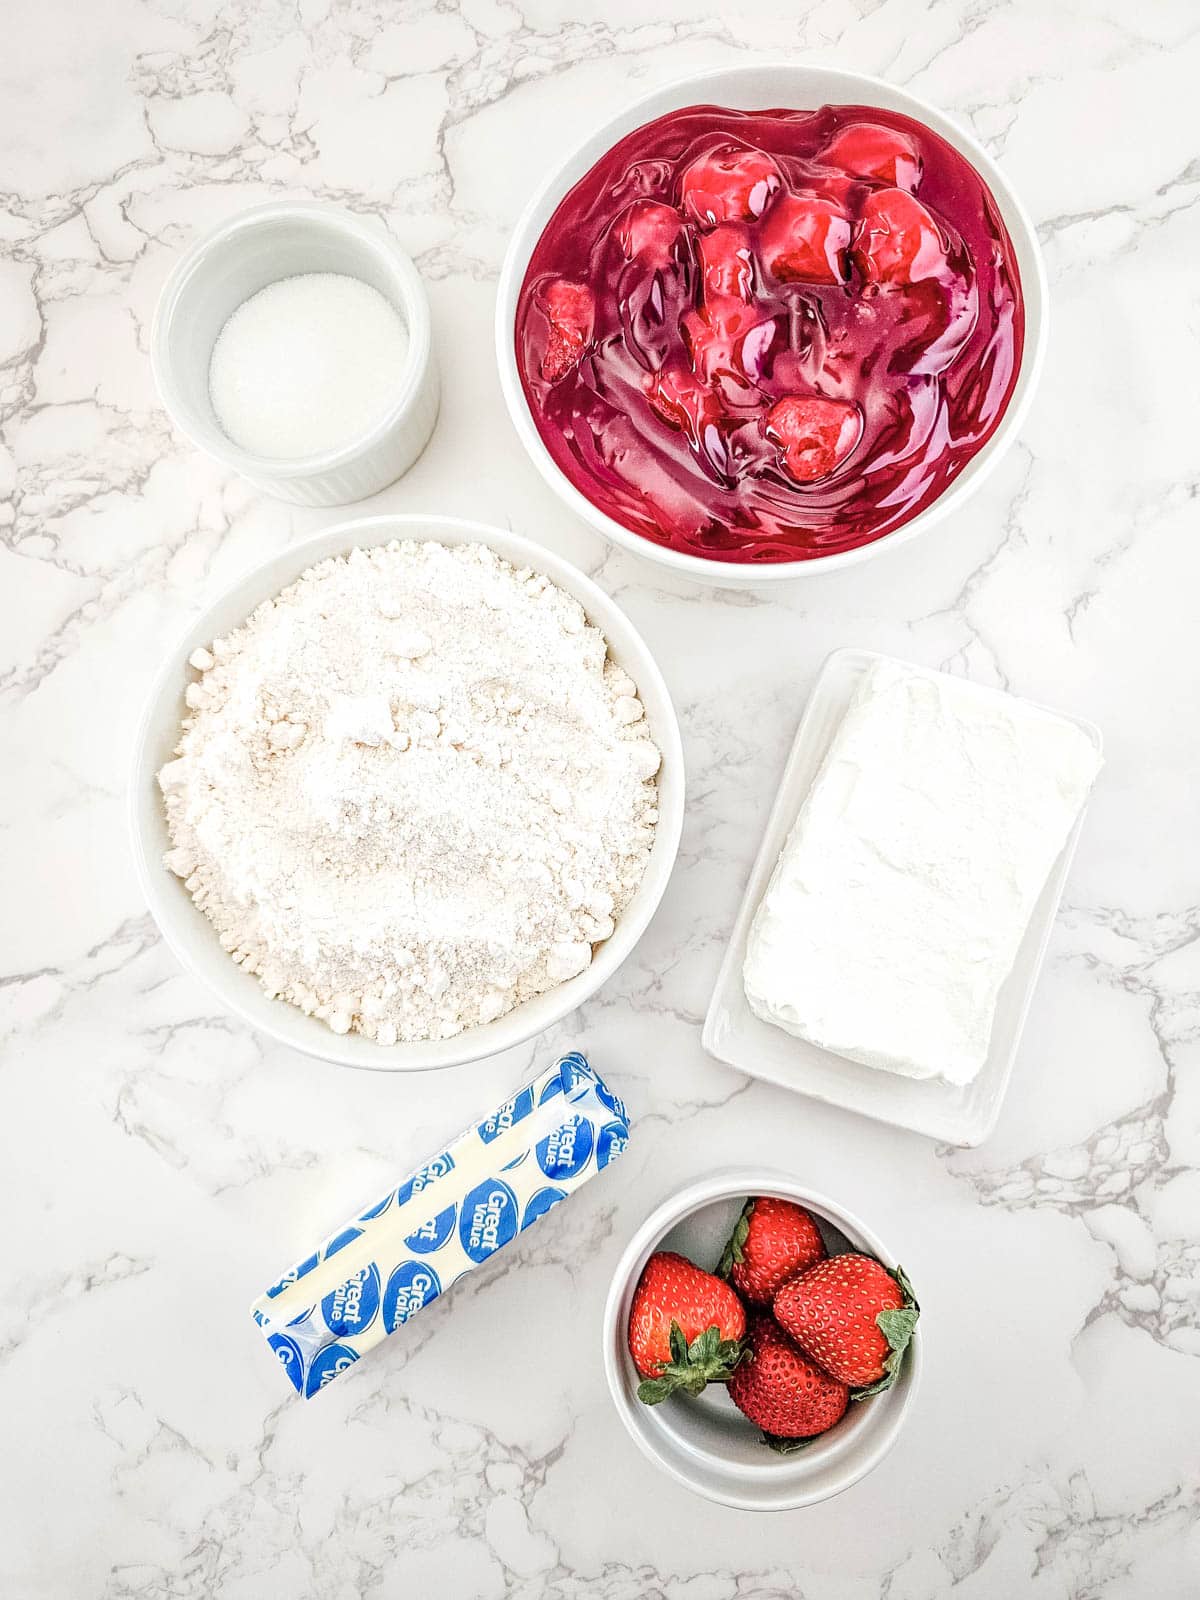 Ingredients for Strawberry Cheesecake Dump Cake on a marble countertop.